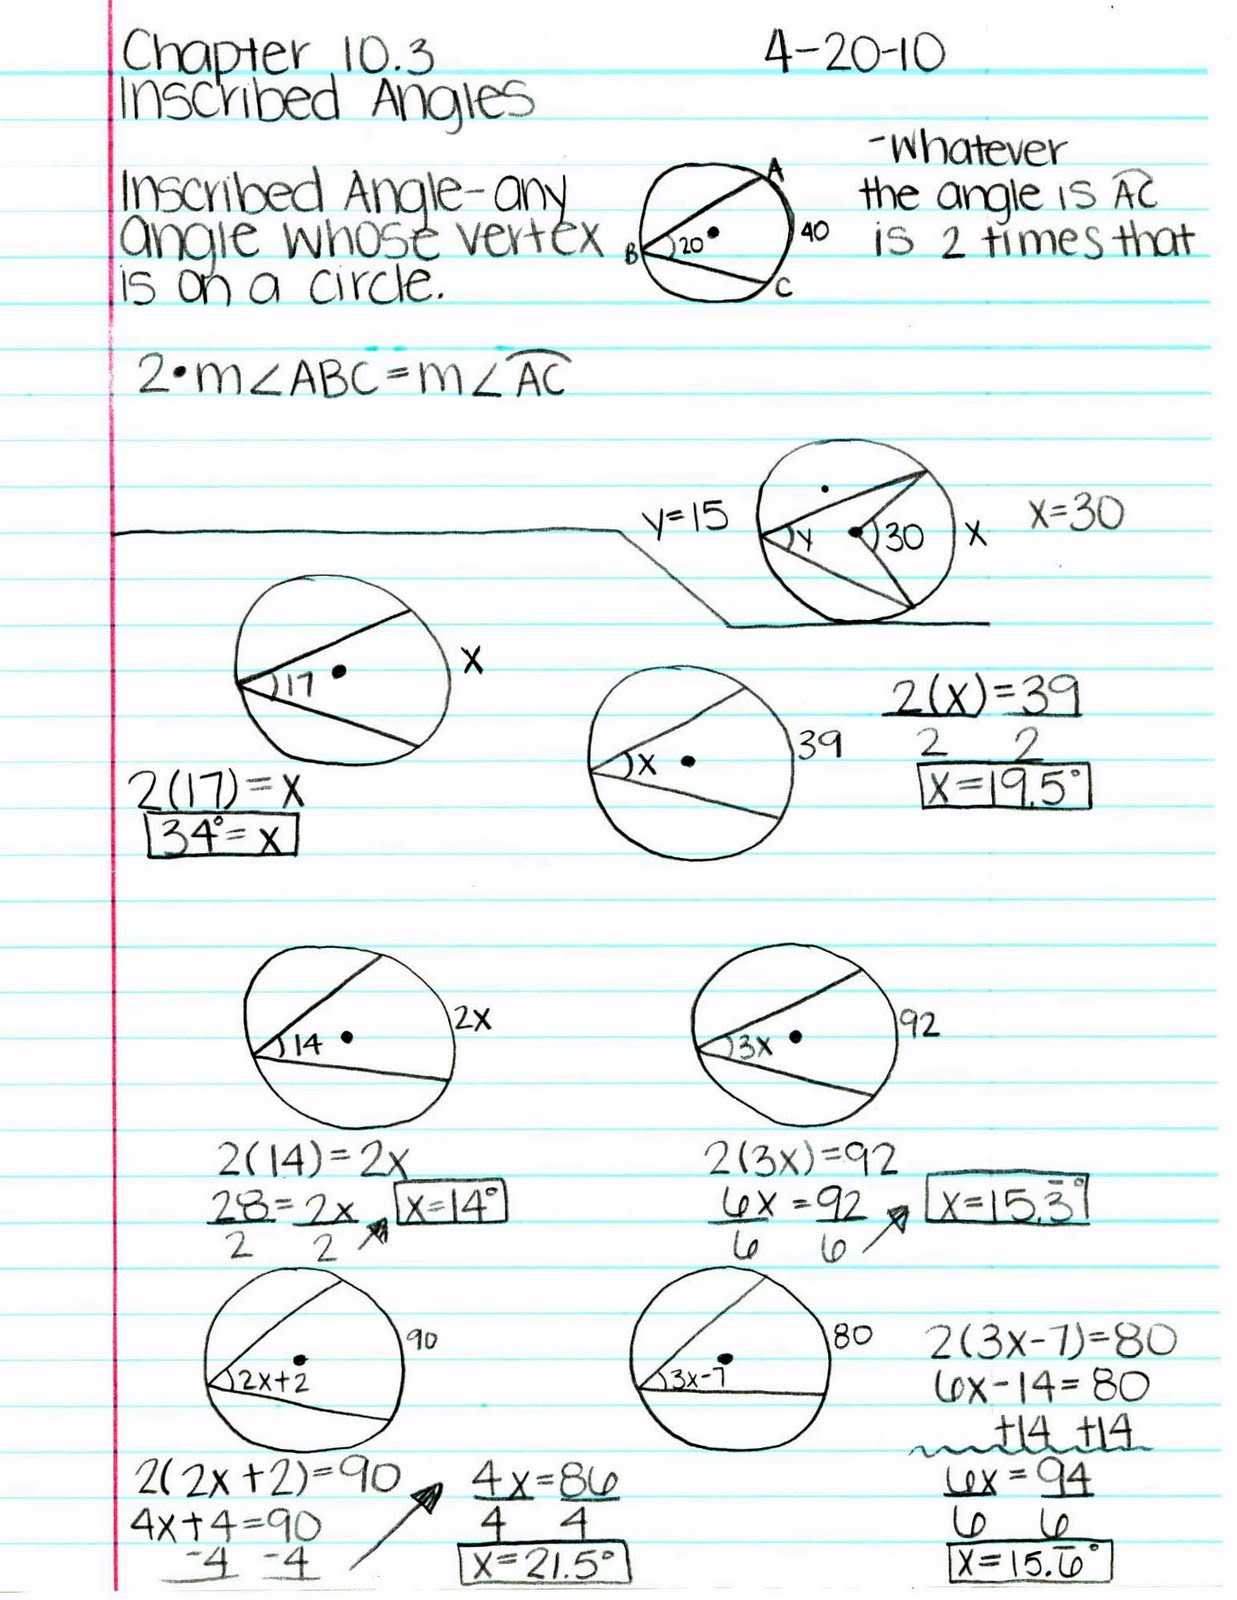 Worksheet Inscribed Angles And Arcs Day 2 Answers